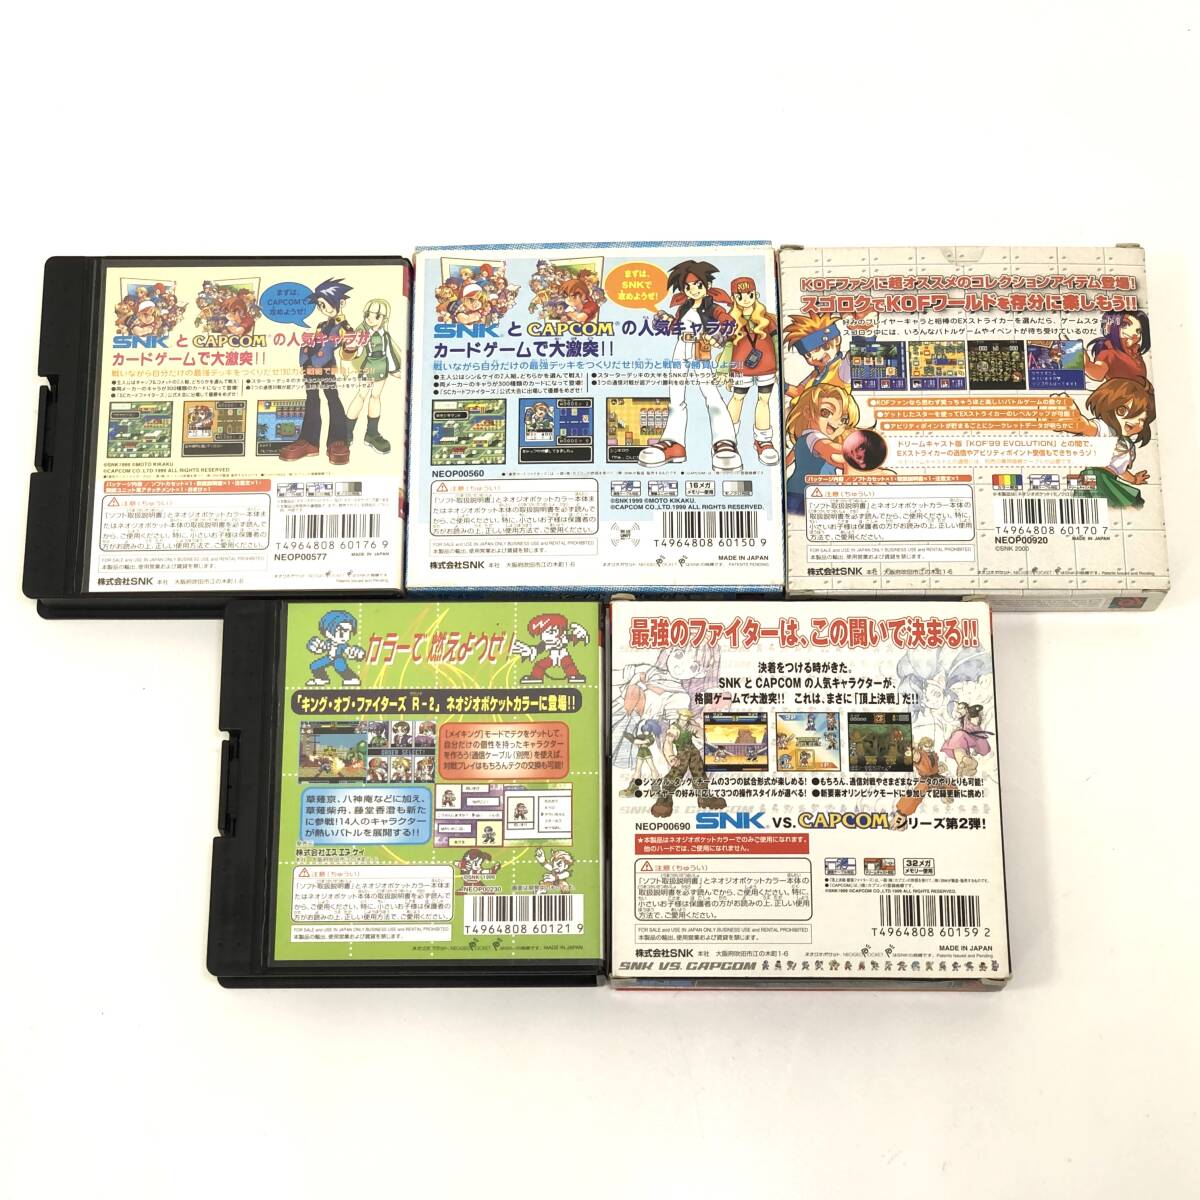 [1 jpy ~]SNK Neo geo pocket exclusive use soft cassette 5 point set KOF card Fighter zvsCAPCOM retro game [ junk ]